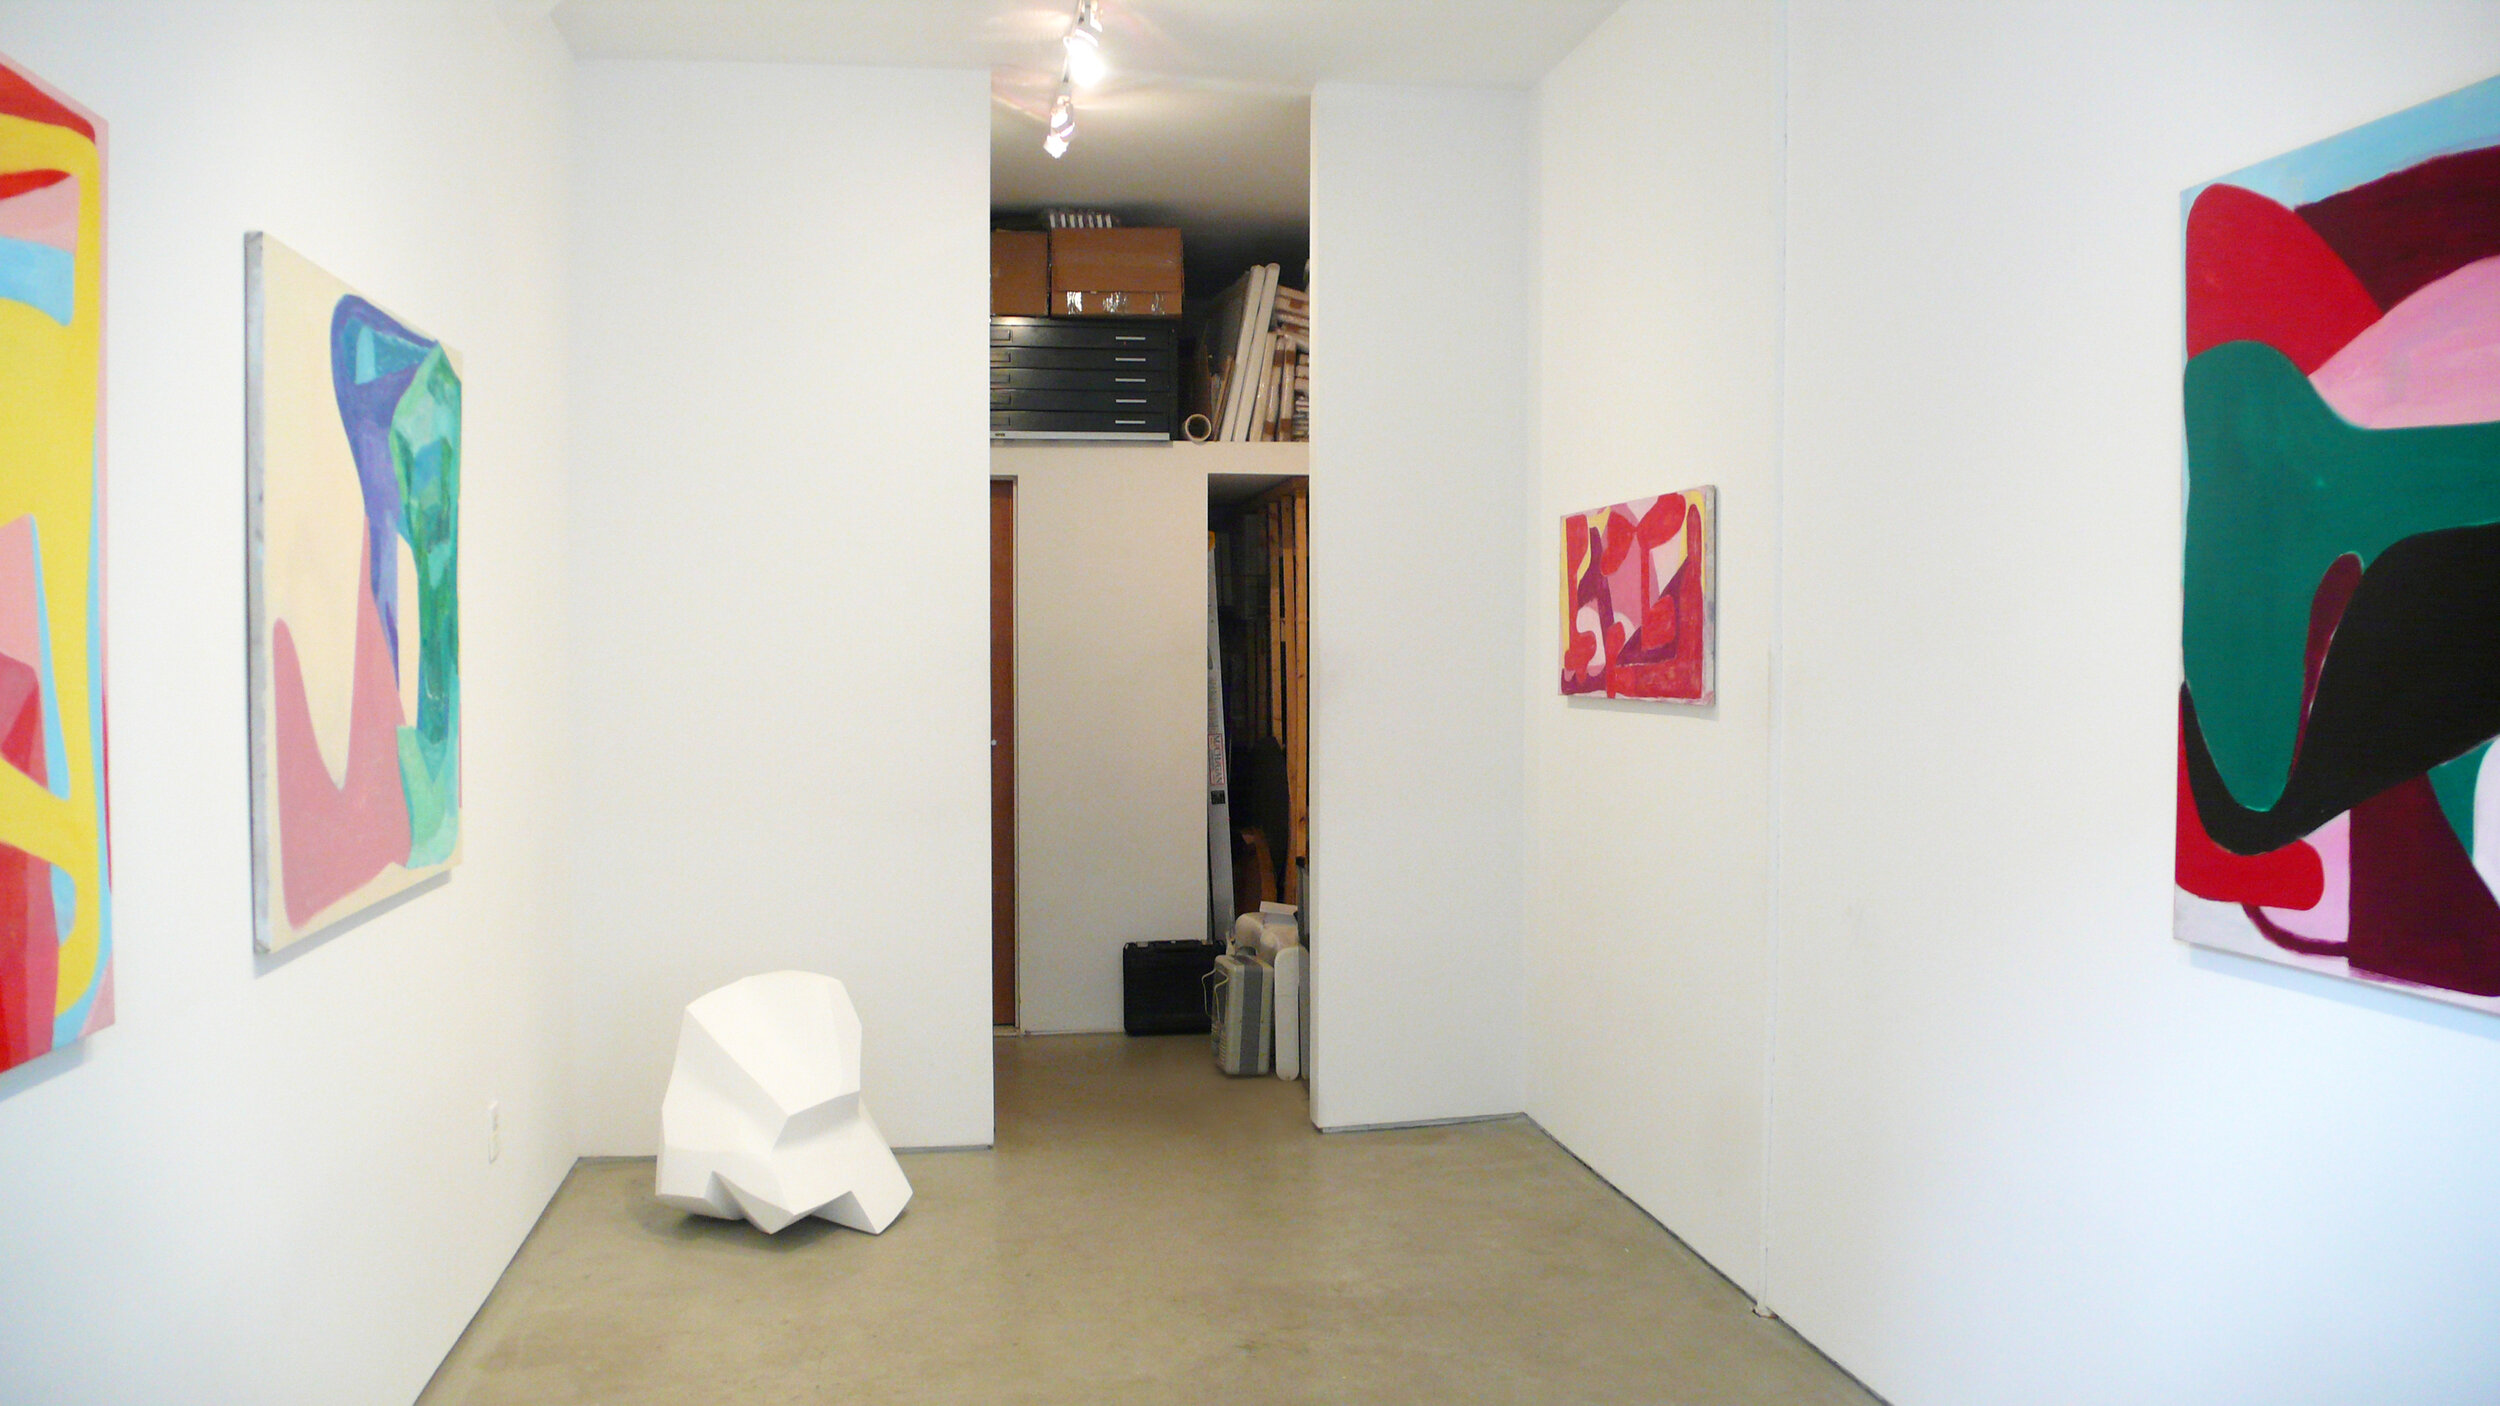  Installation image from the 2010 Charles Dunn exhibition, Demons, at Cindy Rucker Gallery